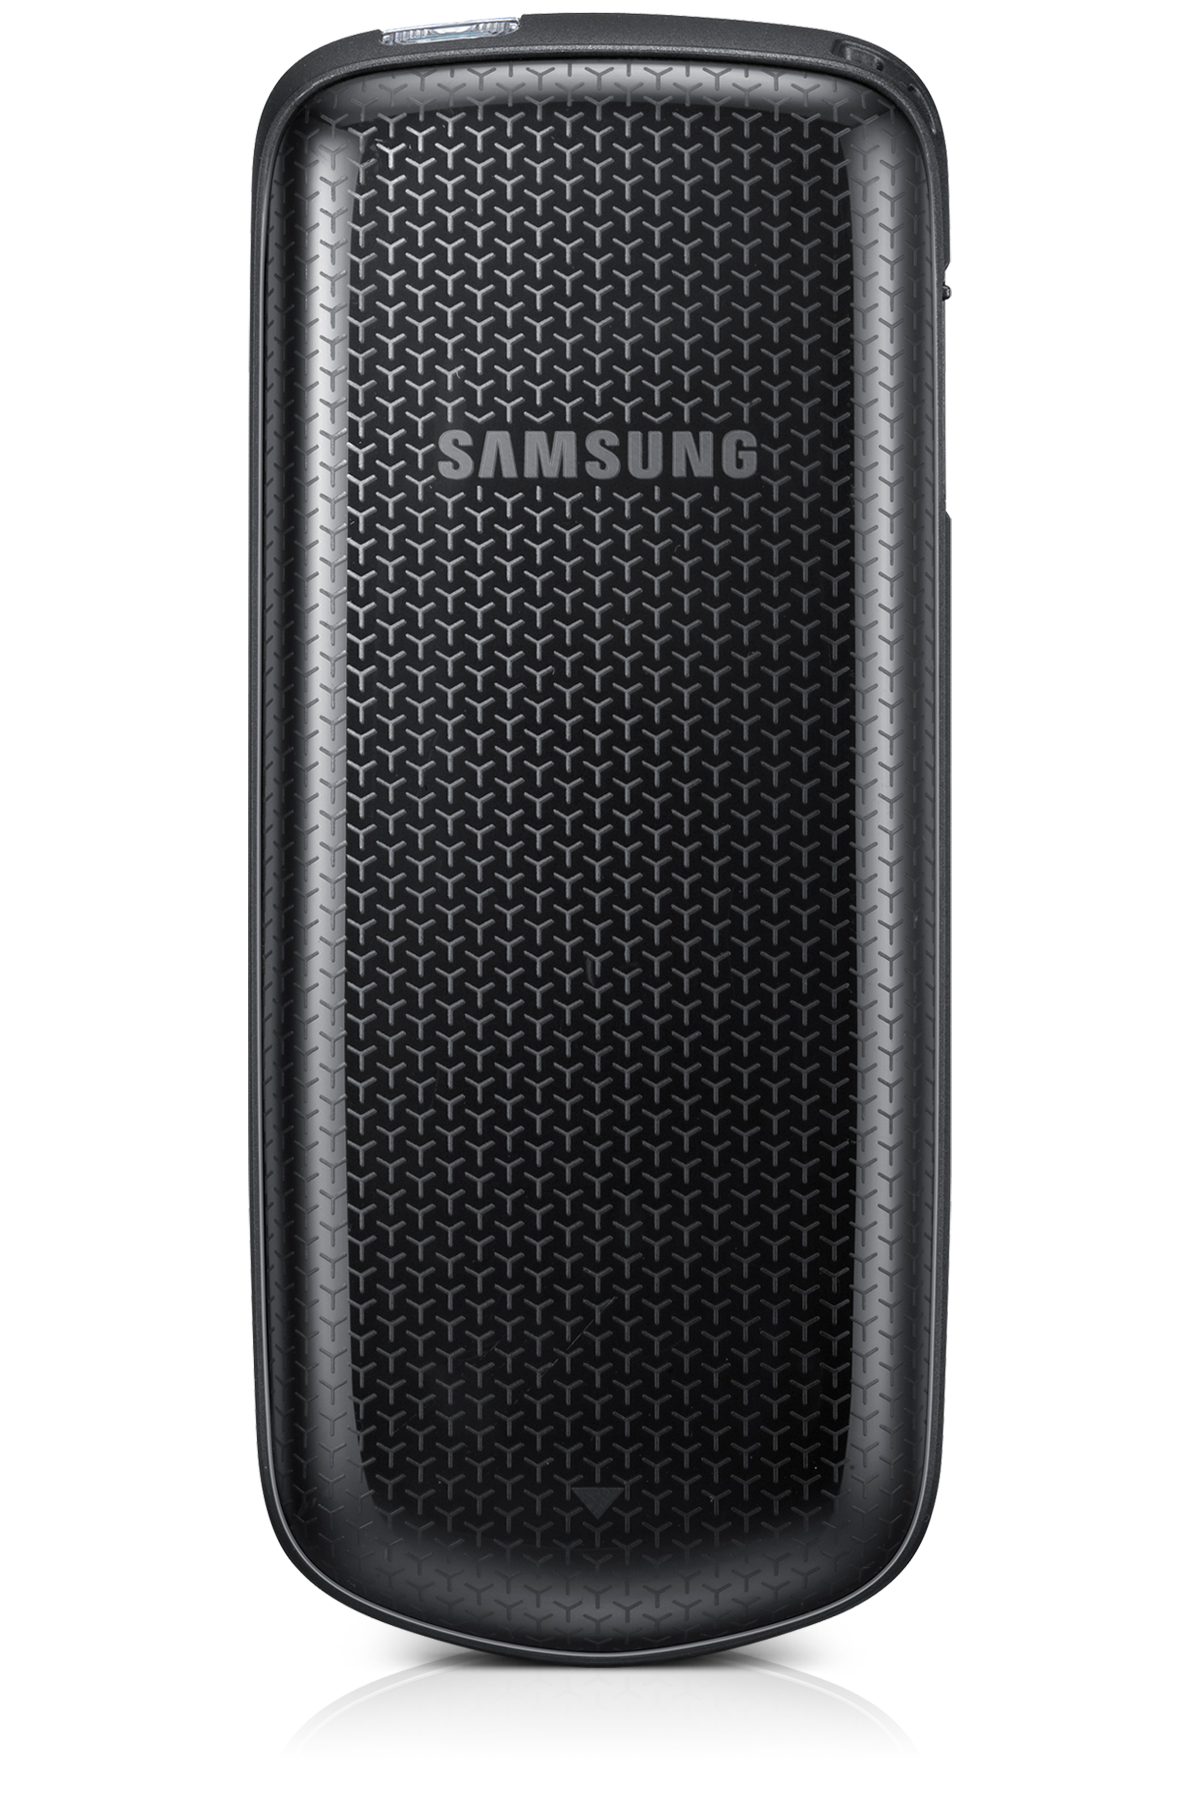 Samsung E1081T for Sale in cheap price large image 1